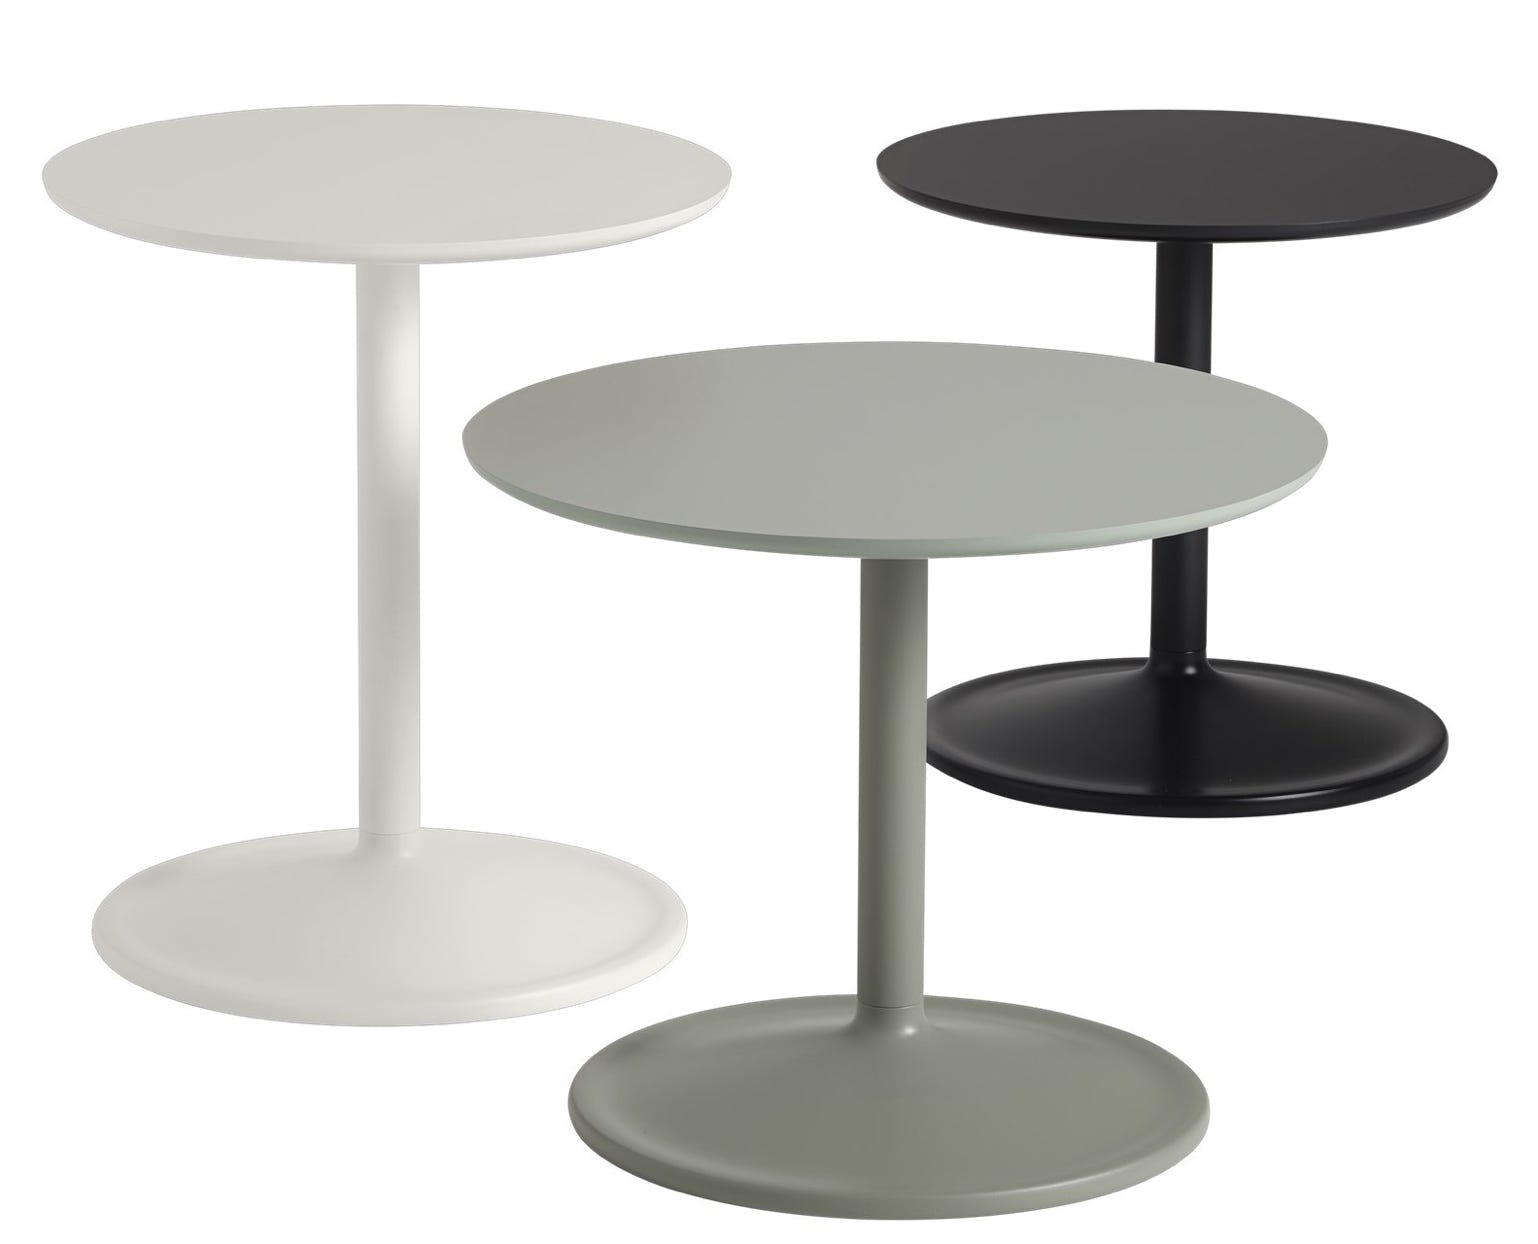 SOFT SIDE TABLE Jens Fager, 2021 